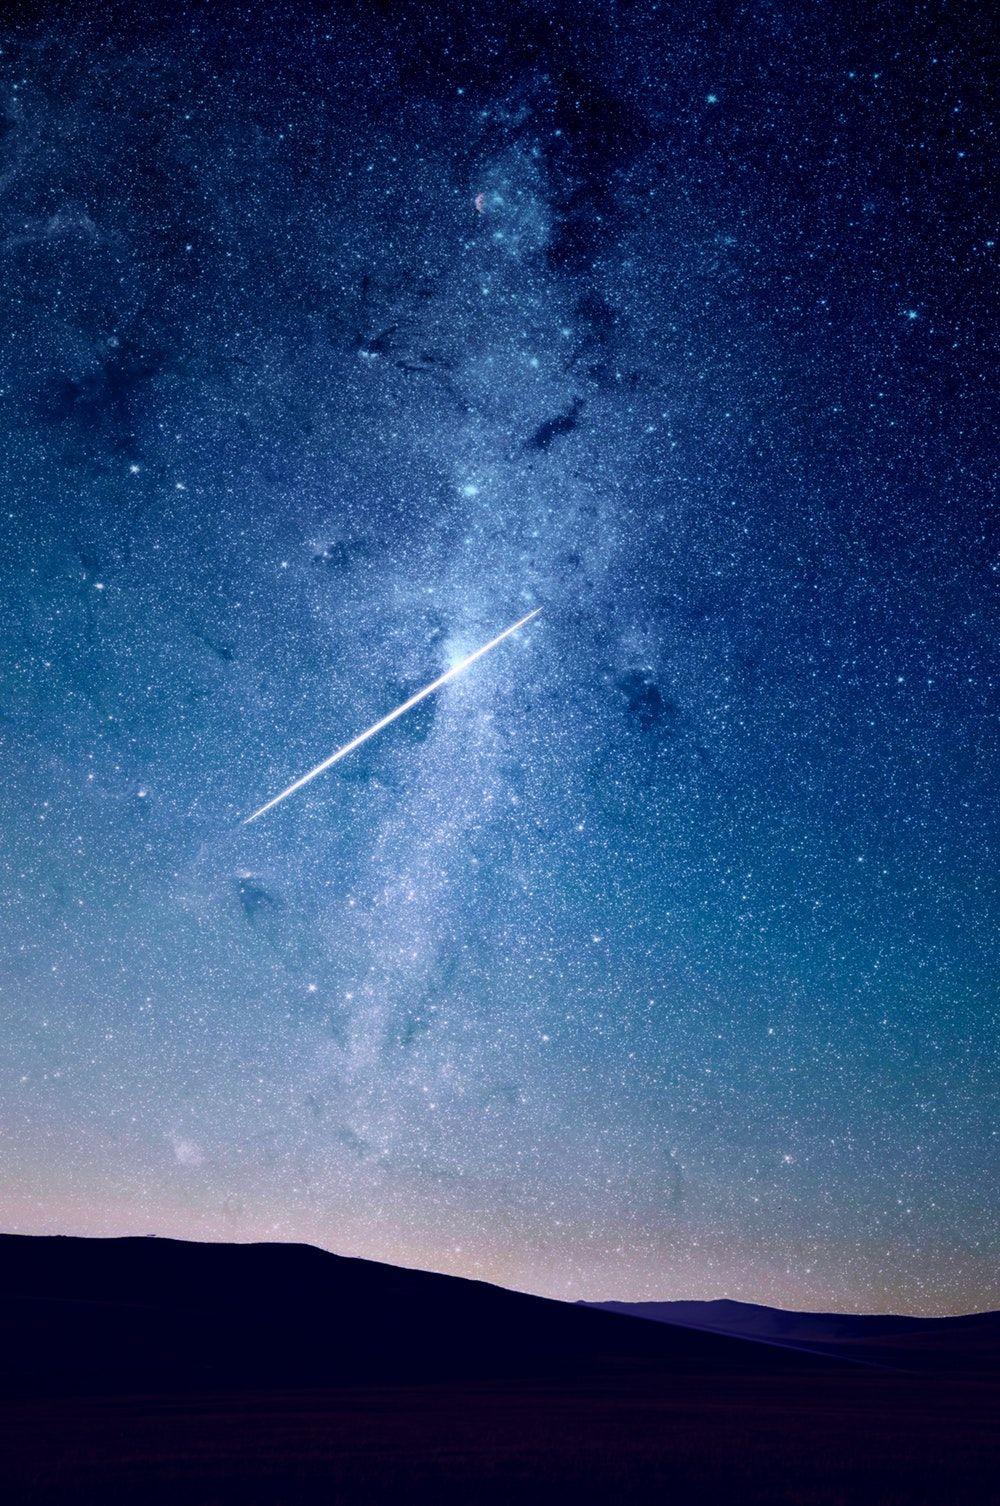 Meteor Picture. Download Free Image